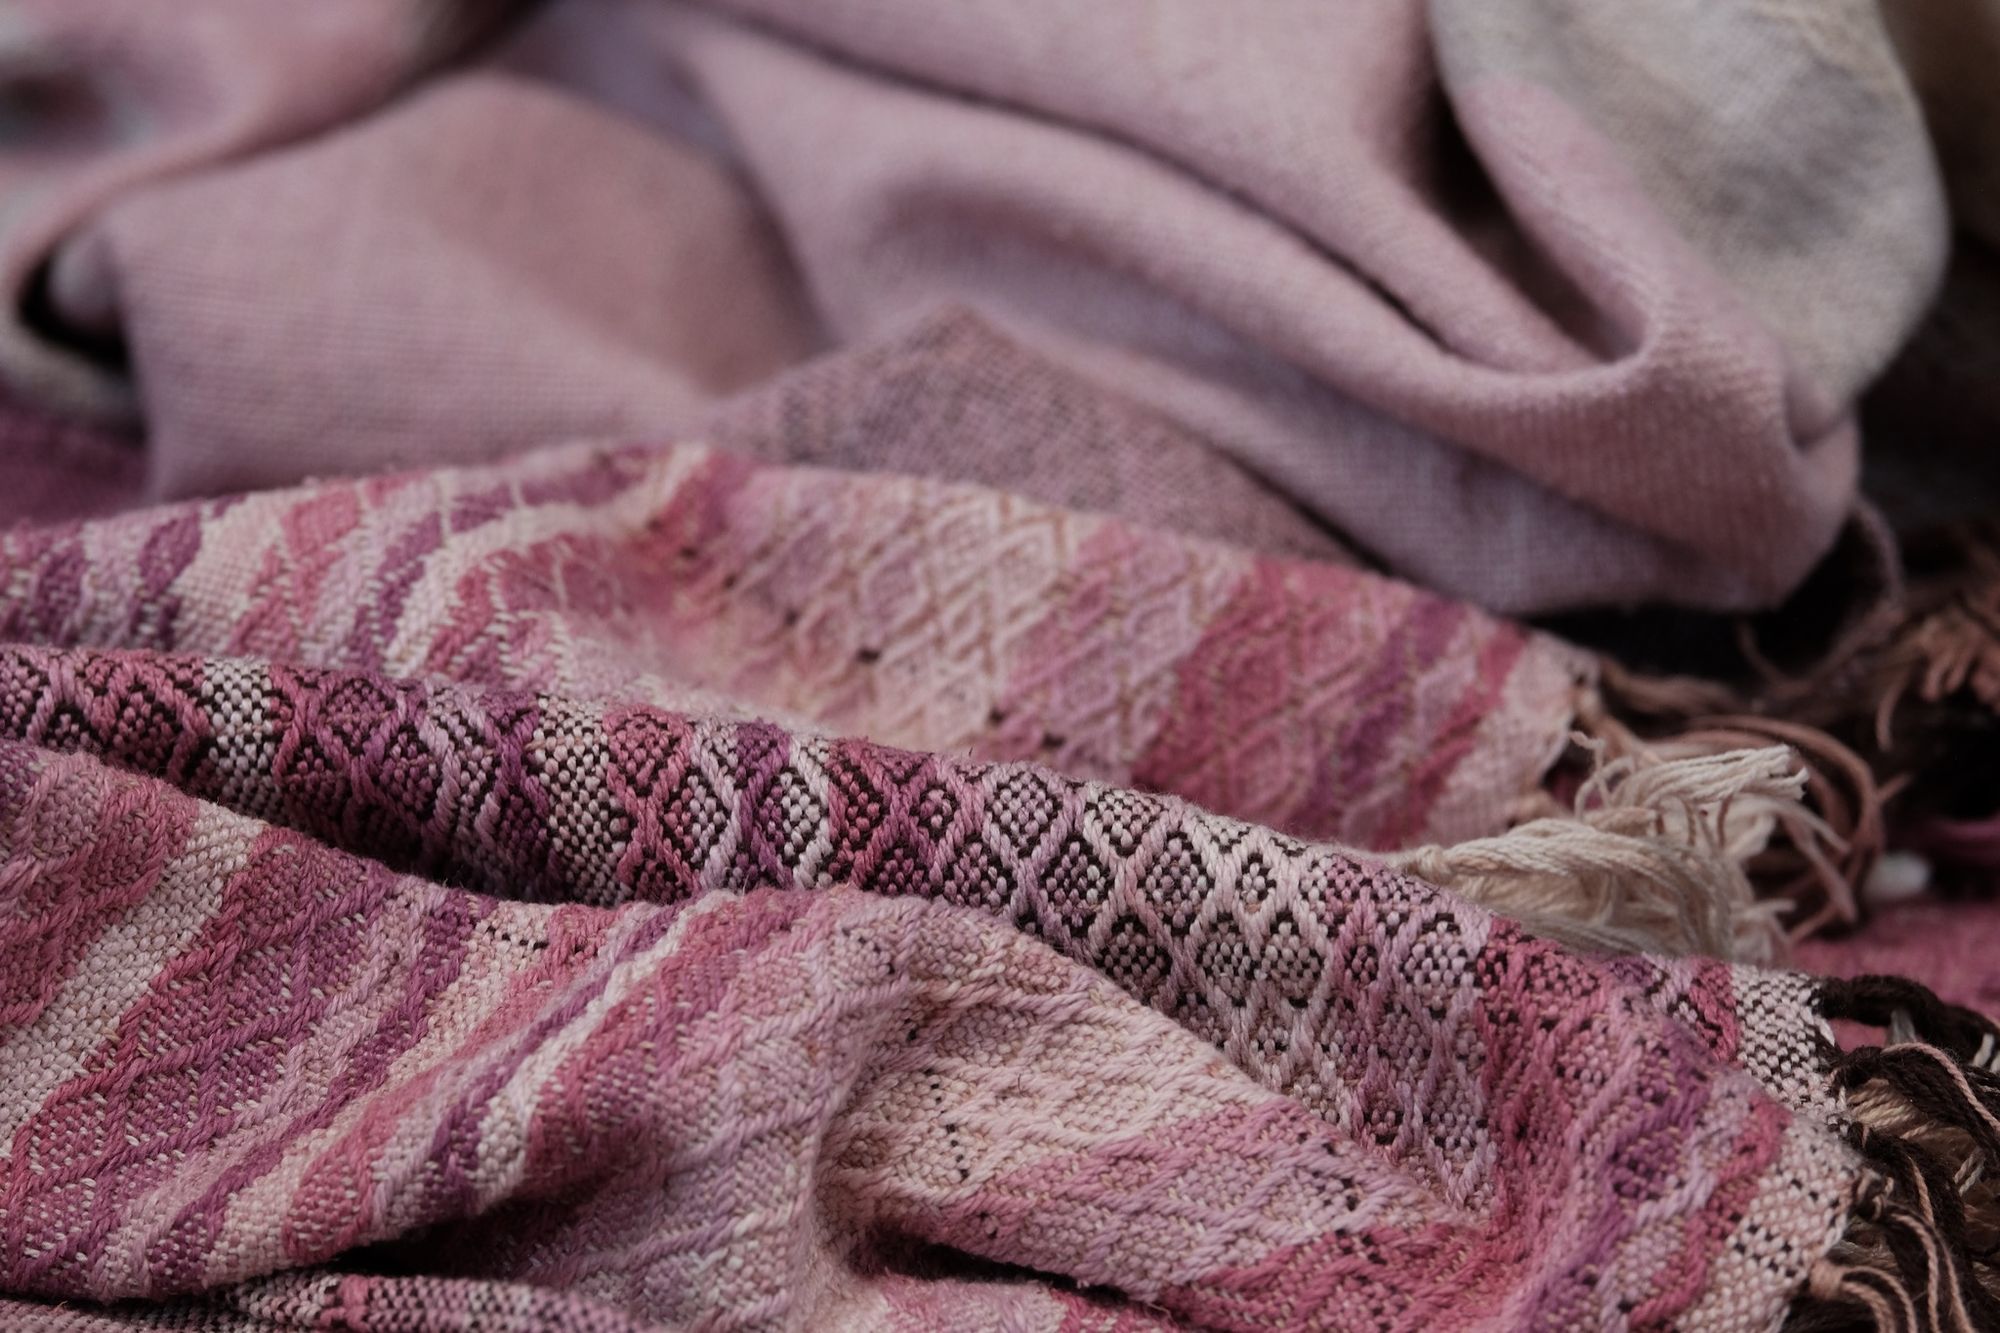 Handwoven fabric lays on a wood floor. The fabric is naturally dyed with cochineal in all shades of pink and fuchsia